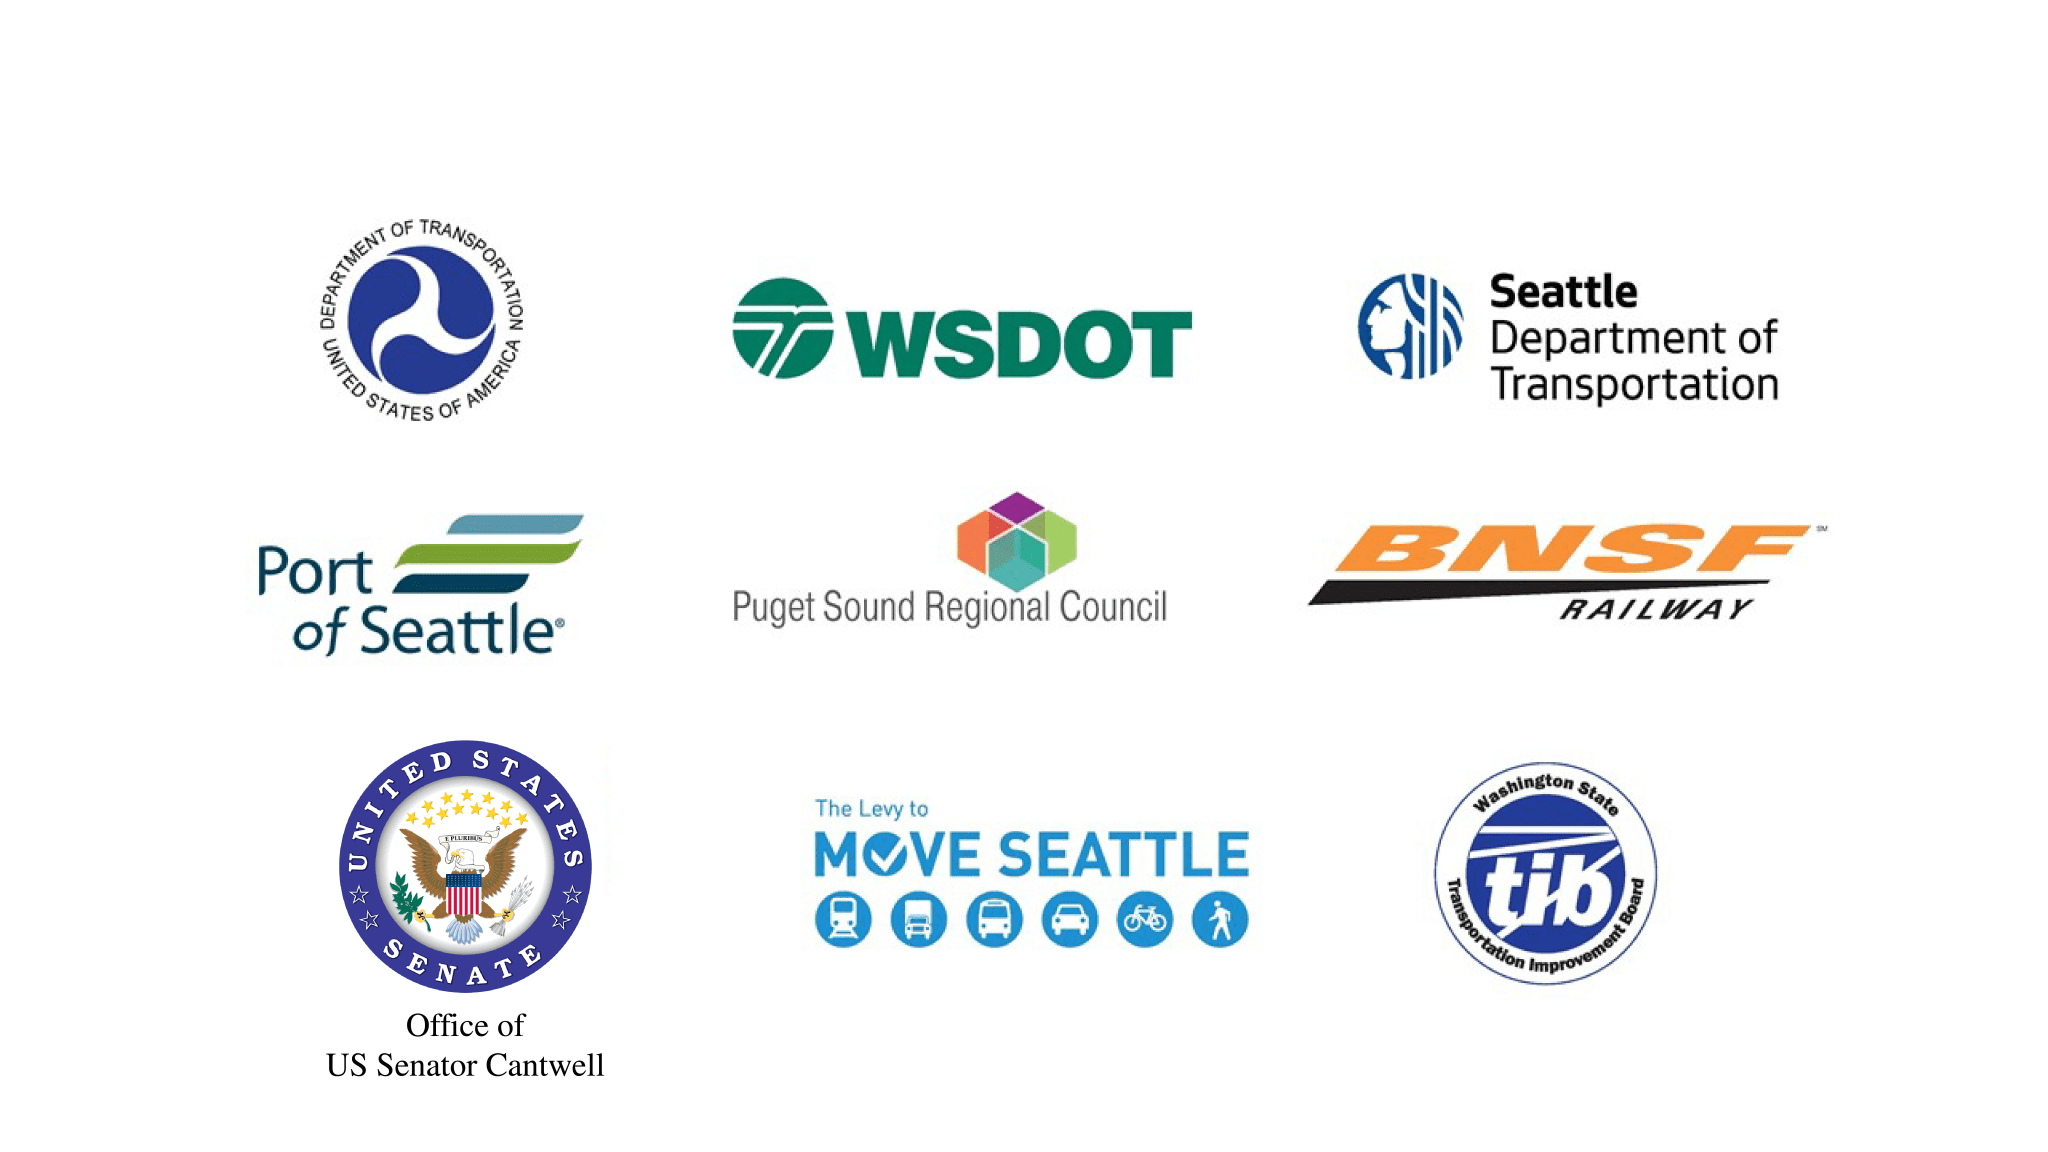 The Lander St Bridge project was funded by the U.S. Department of Transportation, Washington State Department of Transportation, SDOT, the Port of Seattle, the Puget Sound Regional Council, BNSF Railway, the Levy to Move Seattle, and the Washington State Transportation Improvement Board; it was also supported by U.S. Senator Maria Cantwell.